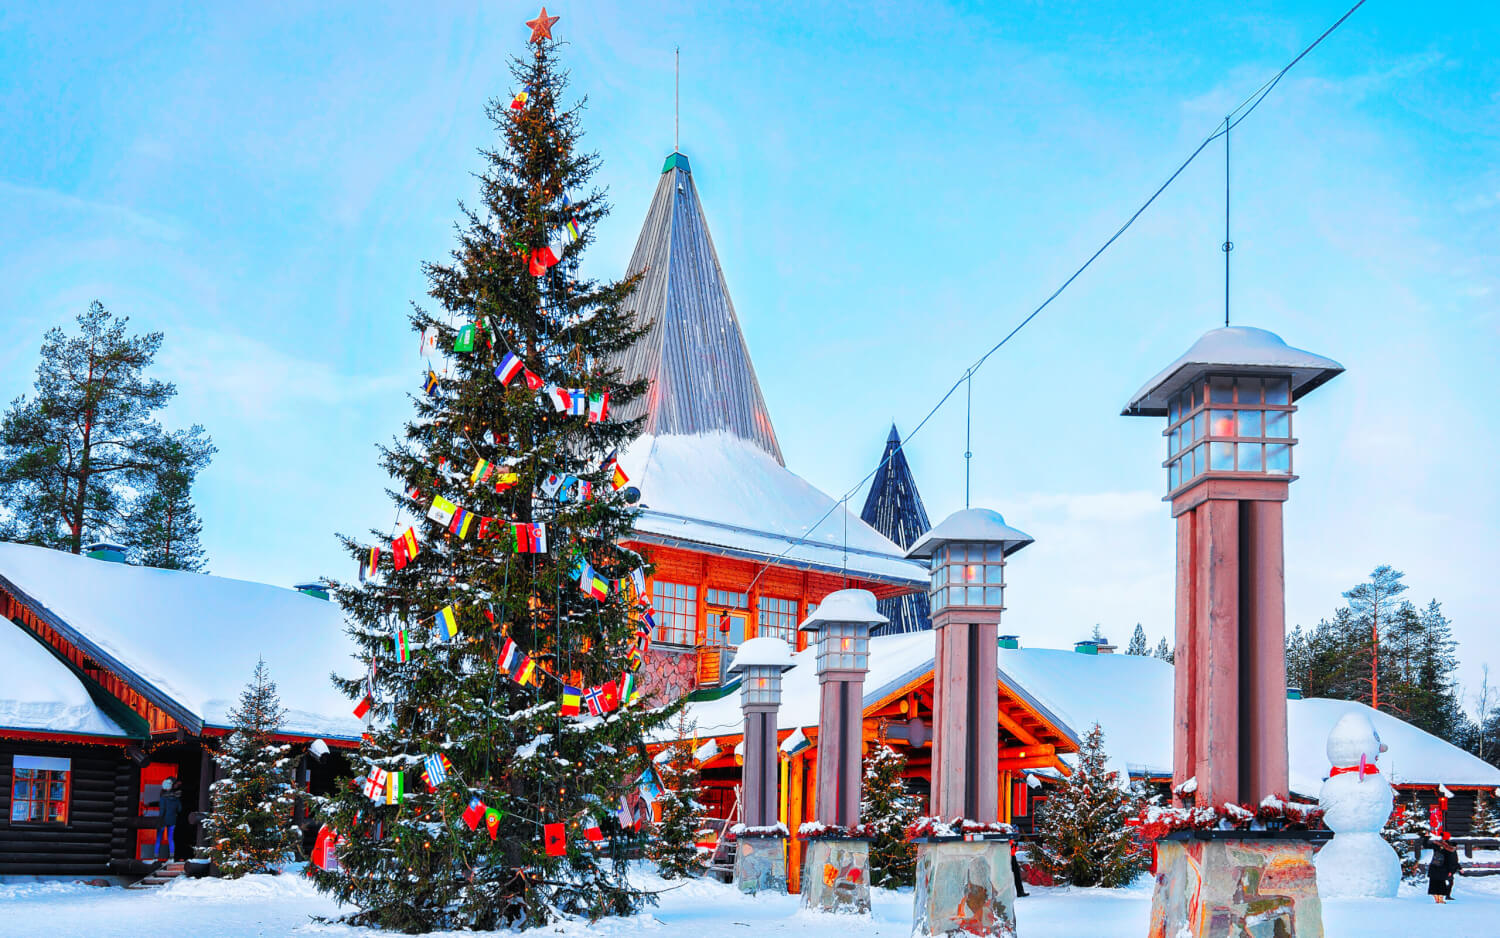 Europe’s Top 10 Magical Christmas Towns and Villages